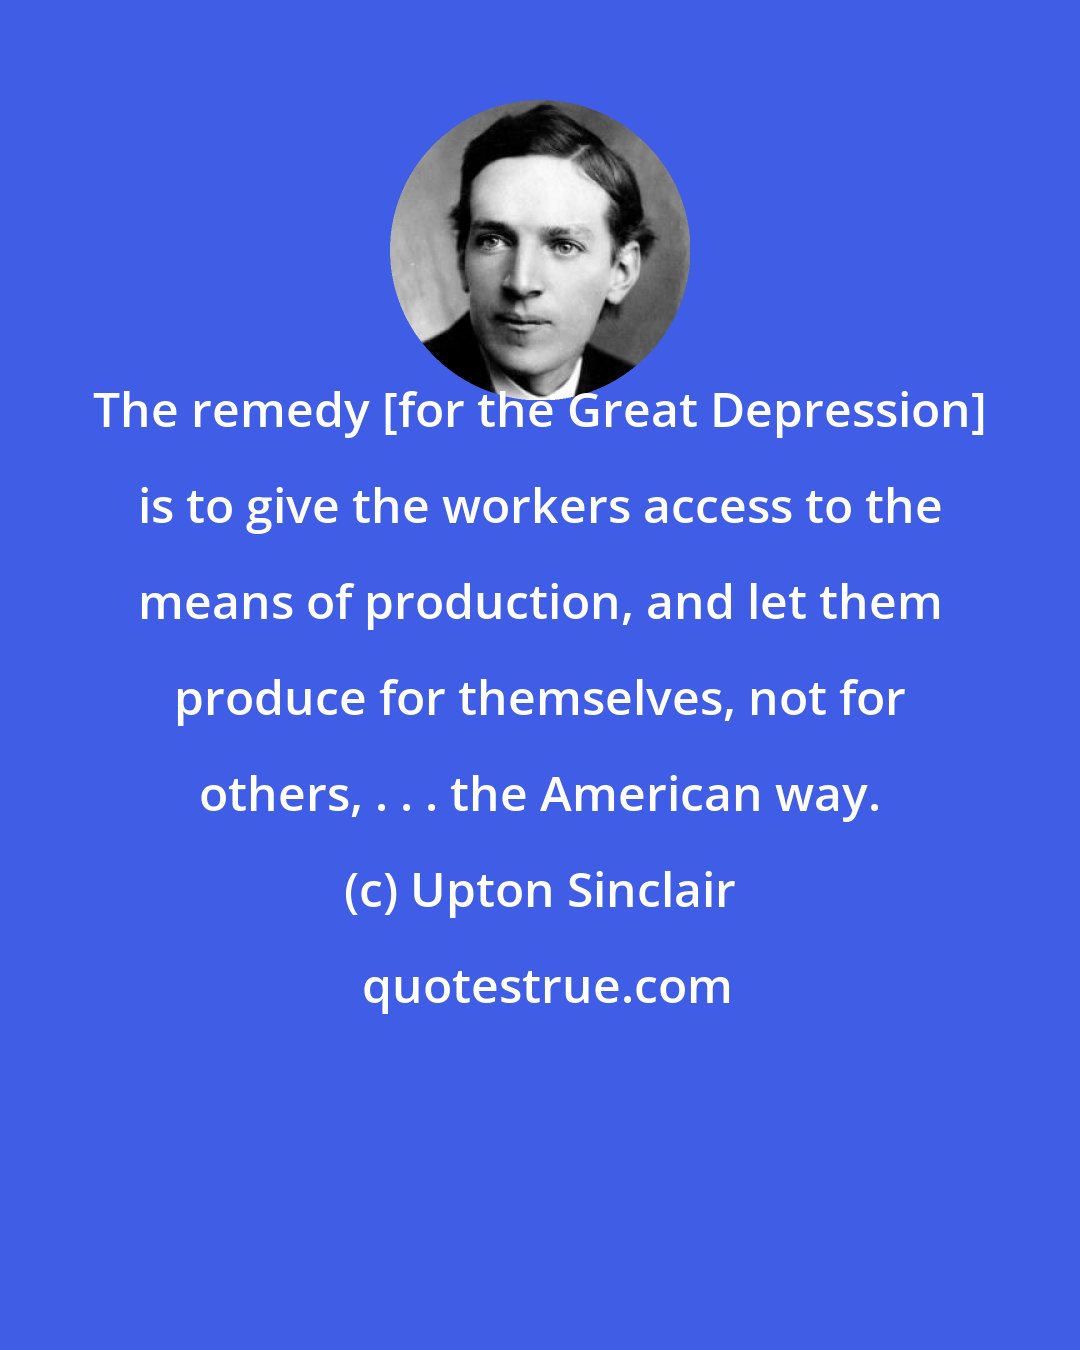 Upton Sinclair: The remedy [for the Great Depression] is to give the workers access to the means of production, and let them produce for themselves, not for others, . . . the American way.